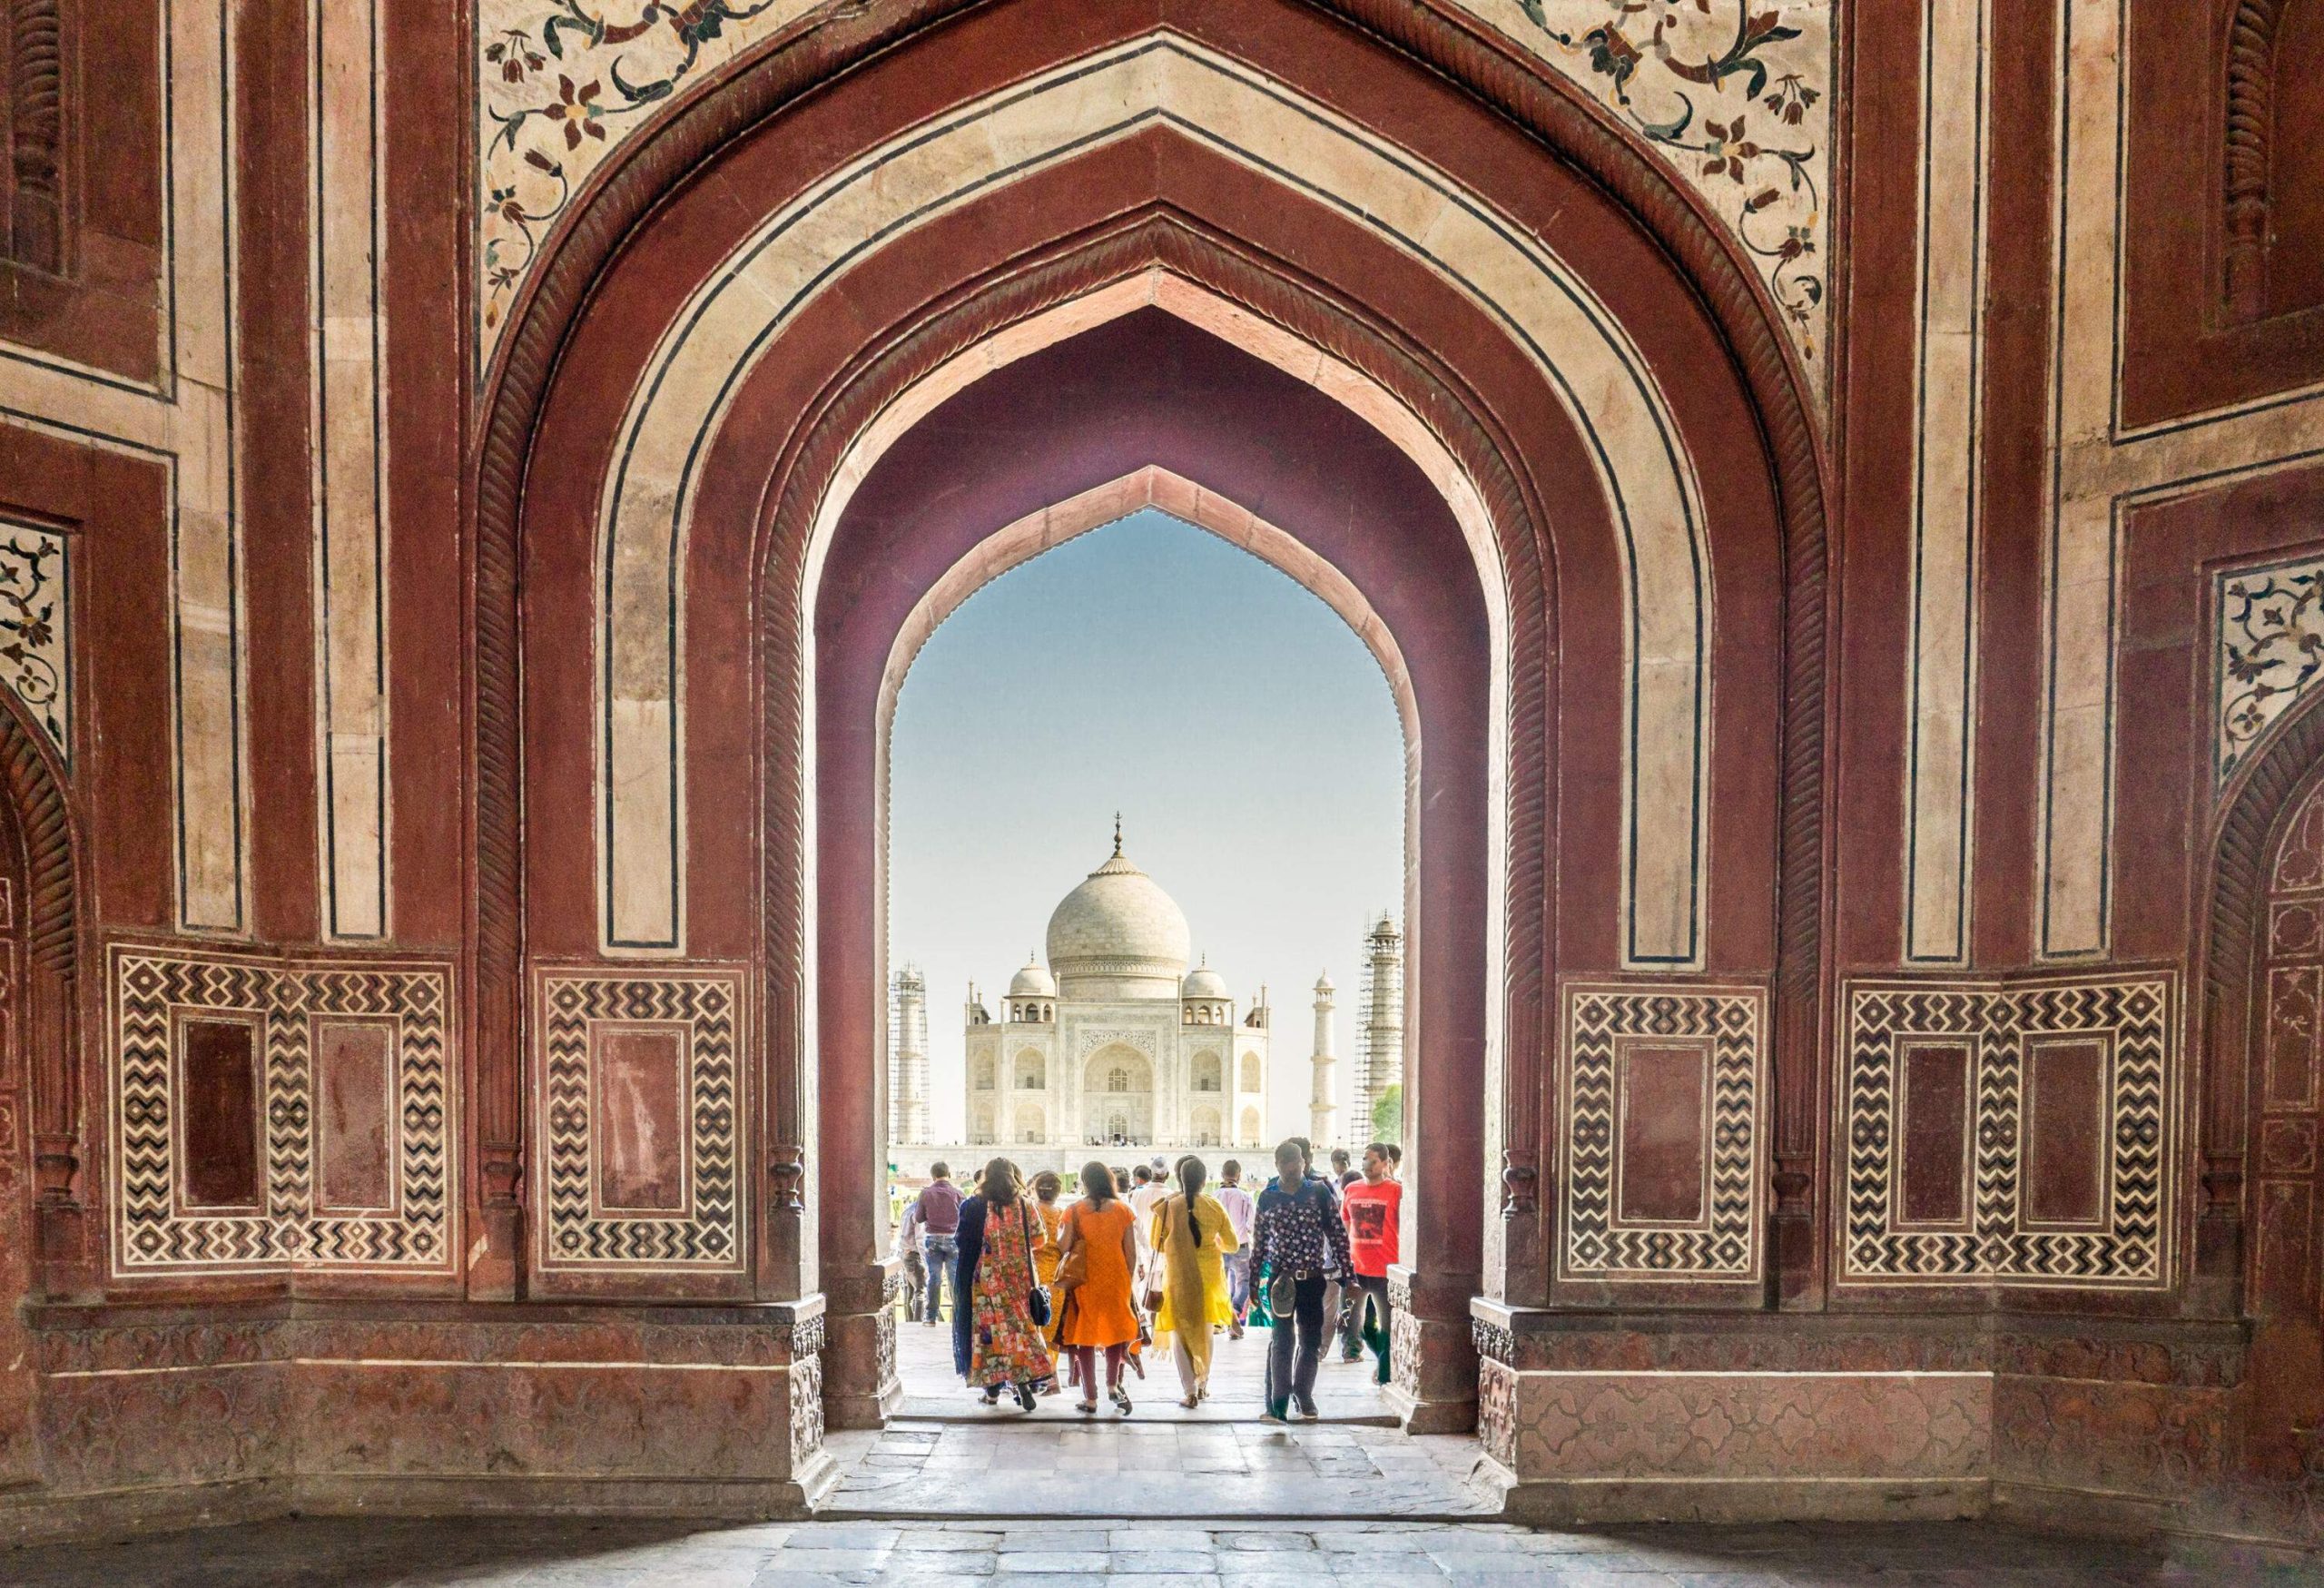 Many tourists visit the iconic Taj Mahal passing through the ornate pointed arch entranceway.